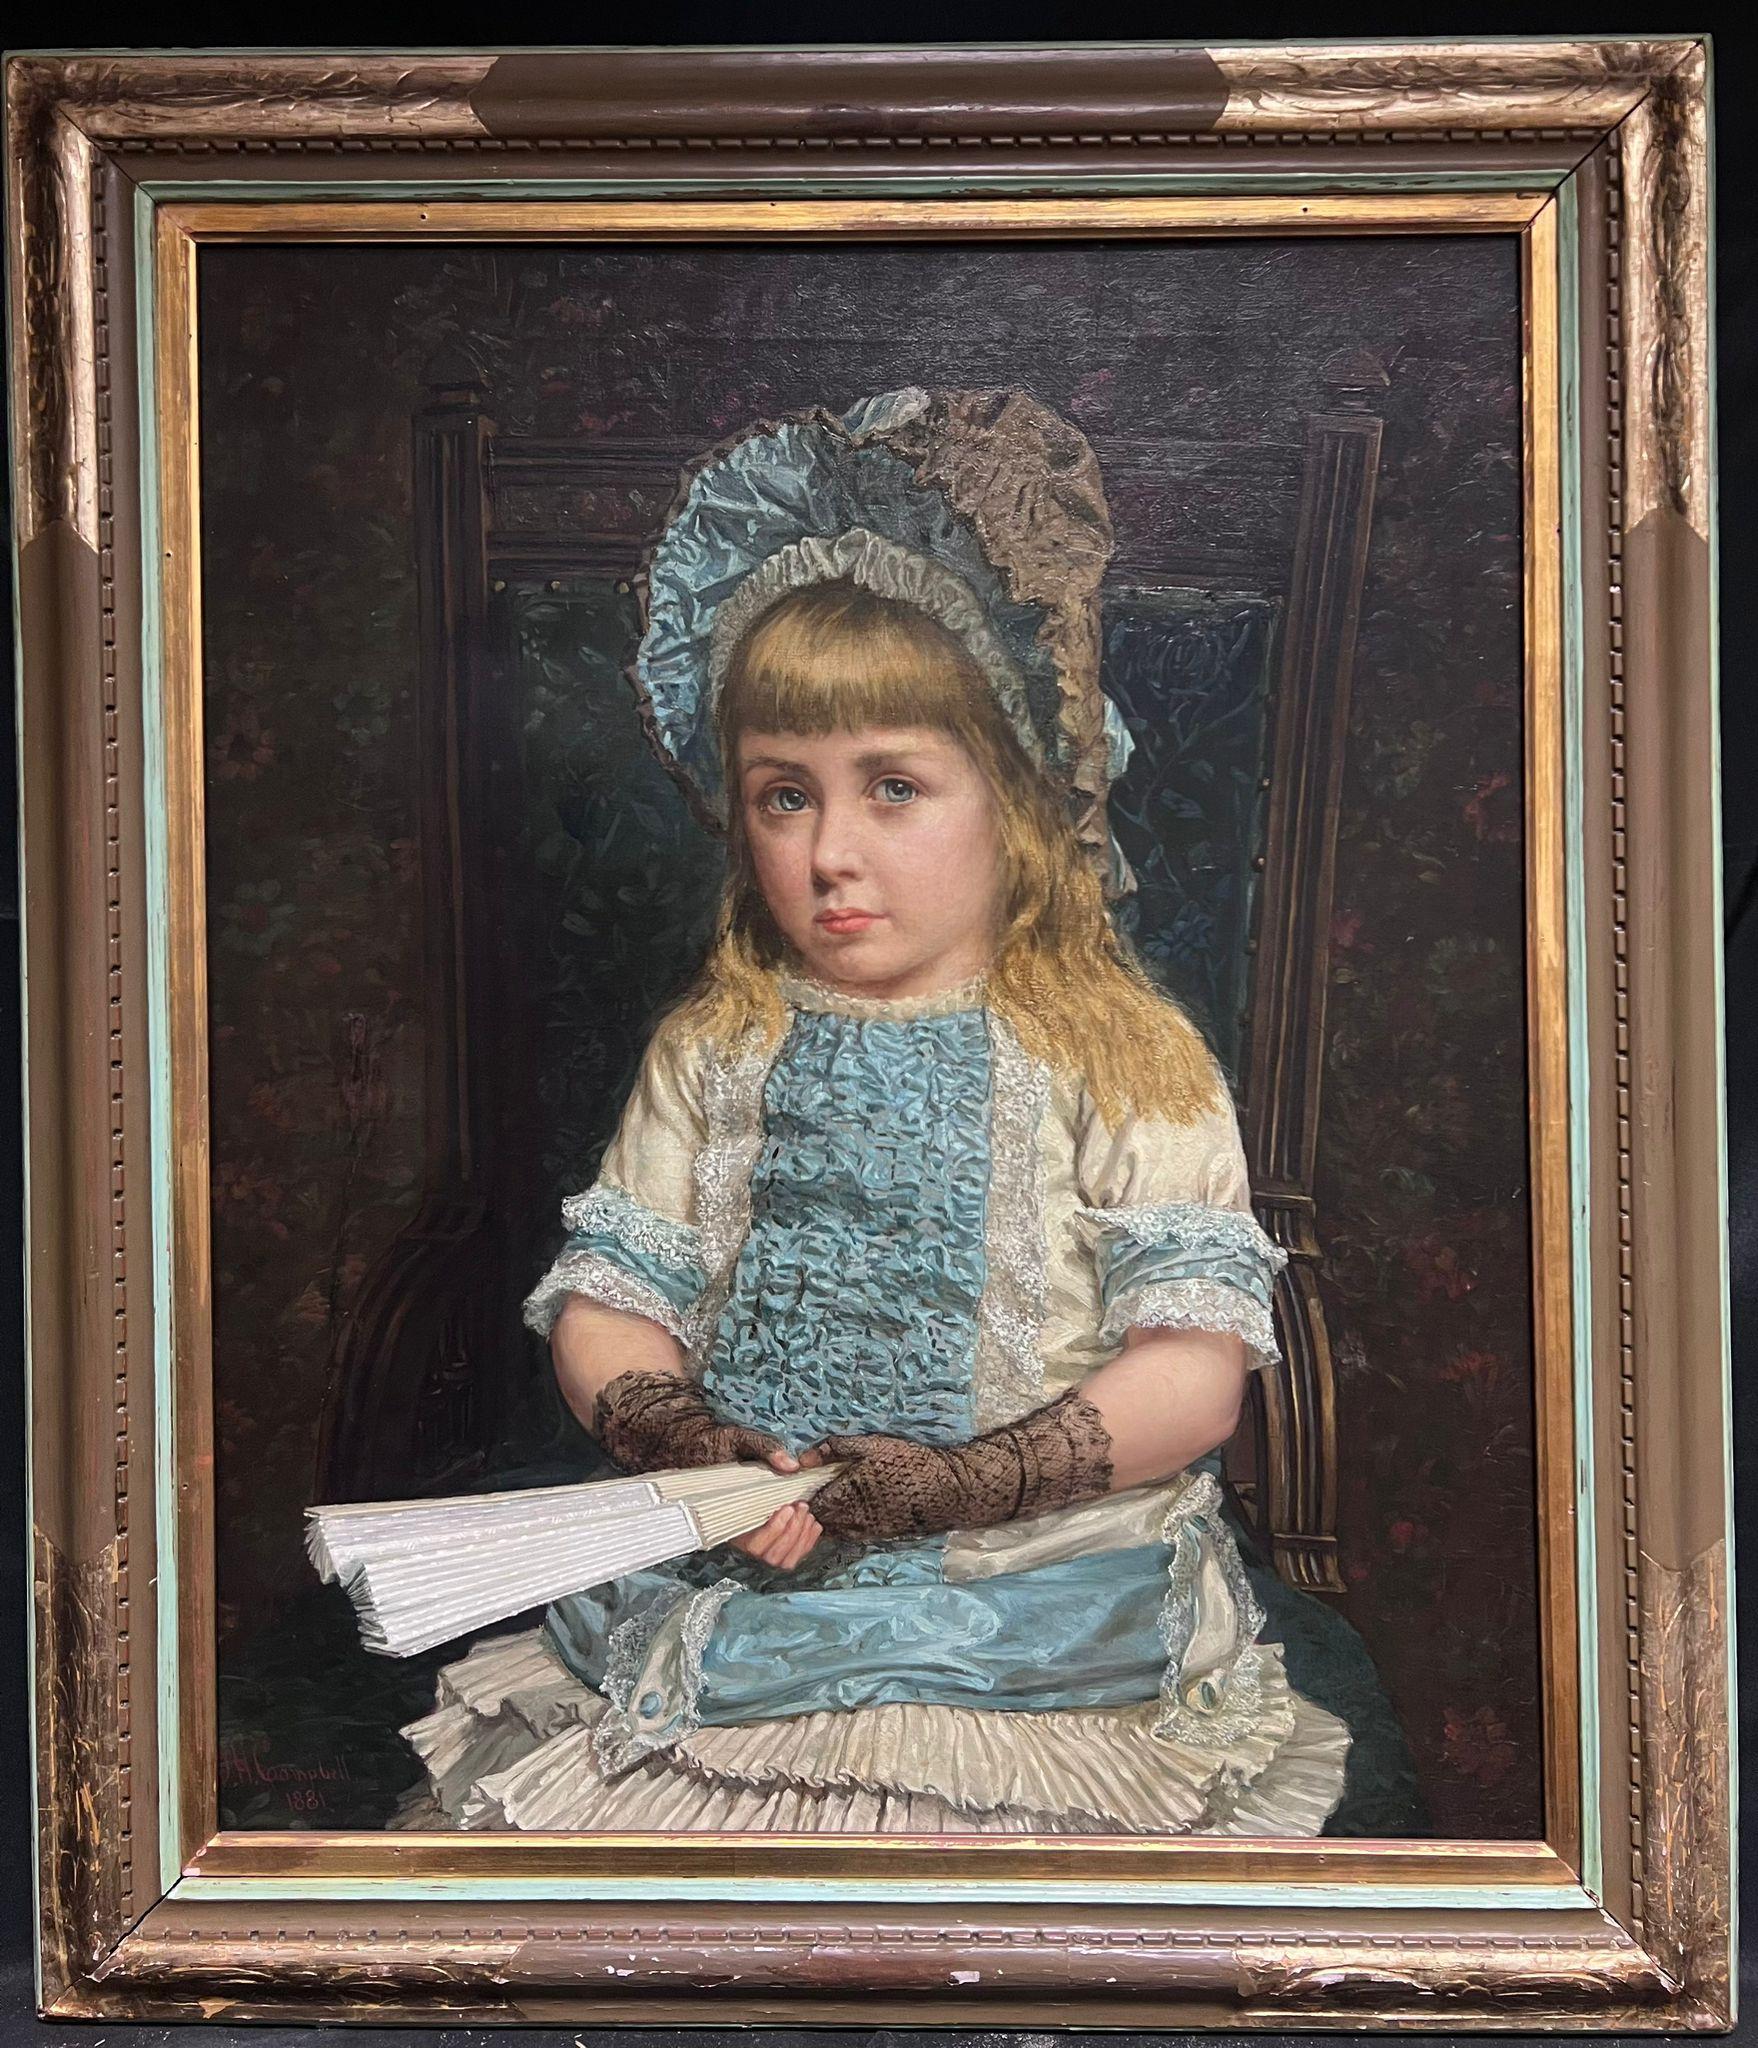 Portrait of Young Girl in Blue Dress
John Hodgson Campbell (British 1855-1927)
signed and dated 1881
oil on canvas, framed
framed: 35 x 30.5 inches
canvas: 30 x 25 inches
provenance: private collection, Cotswolds, England
condition: the painting is